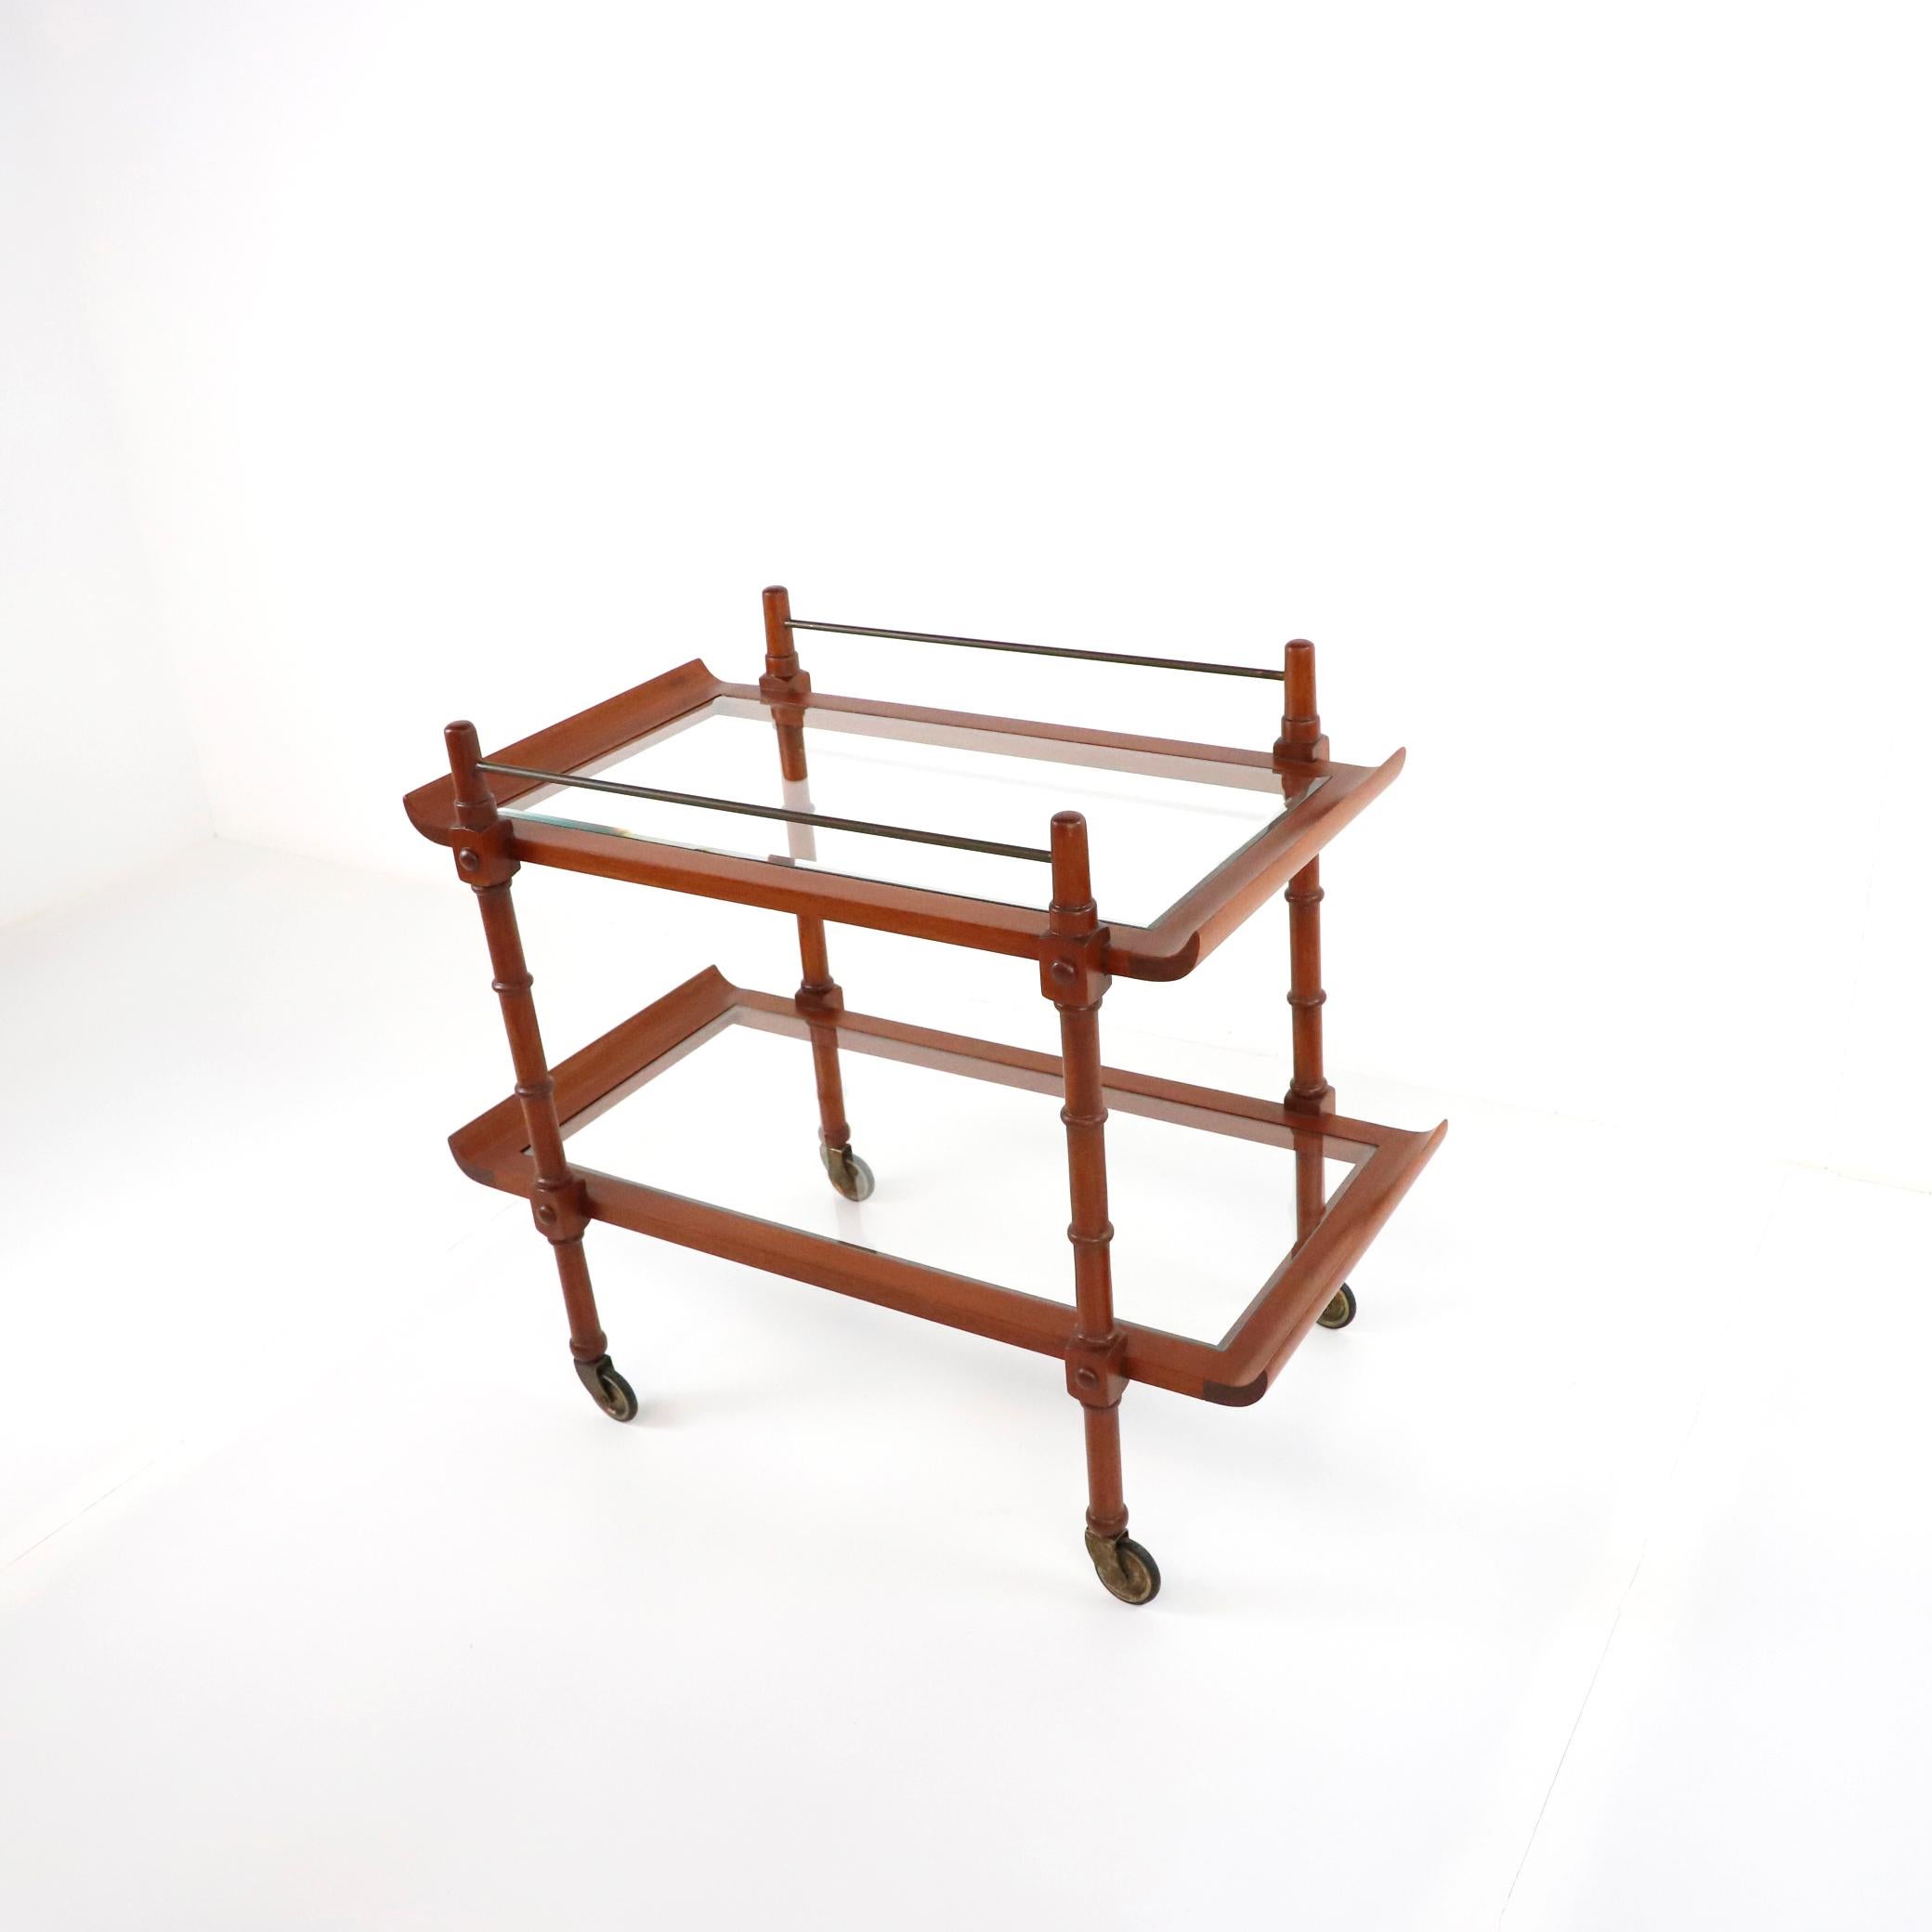 Rare rolling bar or serving cart made of mahogany and steel, designed by Frank Kyle, circa 1950.